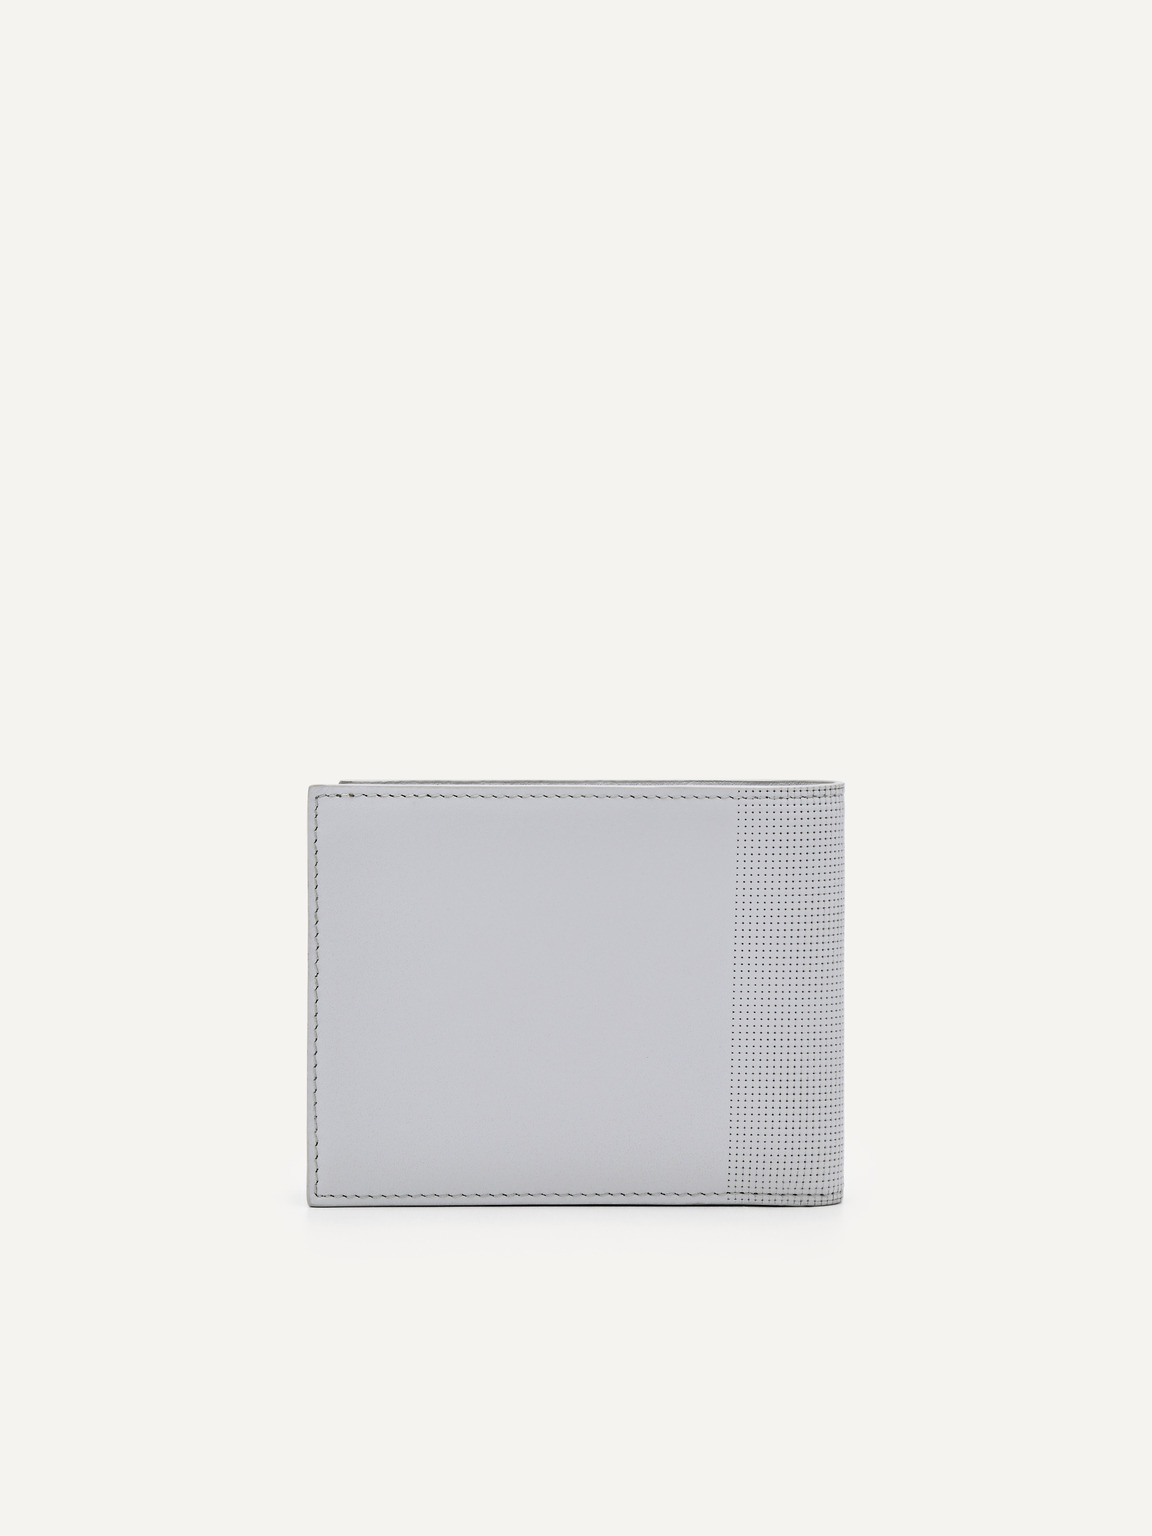 Oliver Leather Bi-Fold Wallet with Insert, Light Grey